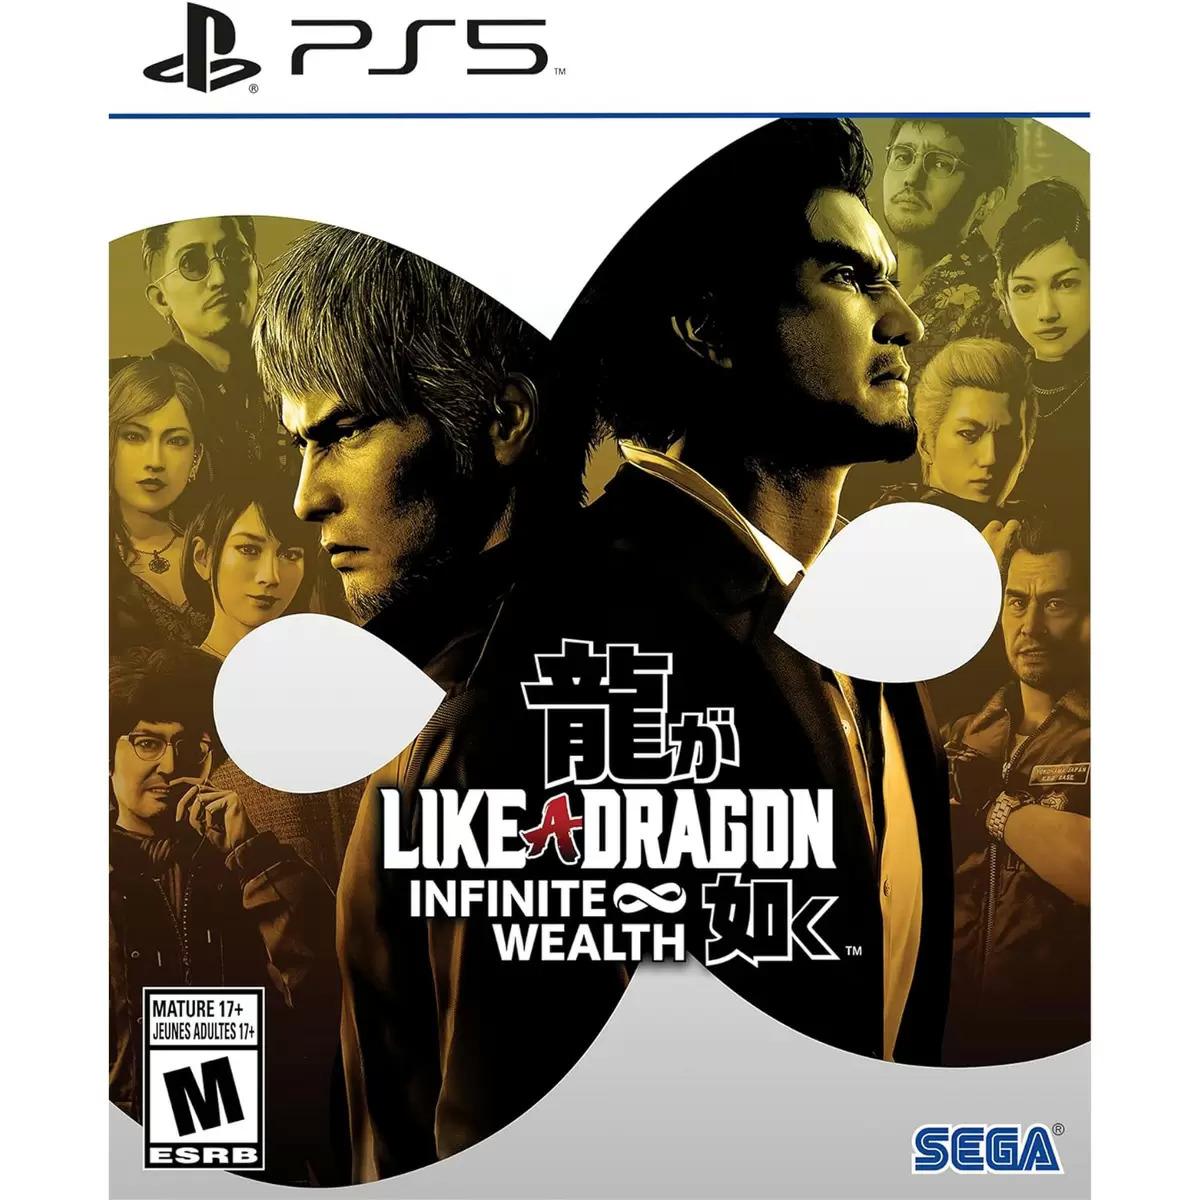 Like a Dragon Infinite Weatlh Playstation 4 5 or Xbox One for $39.99 Shipped